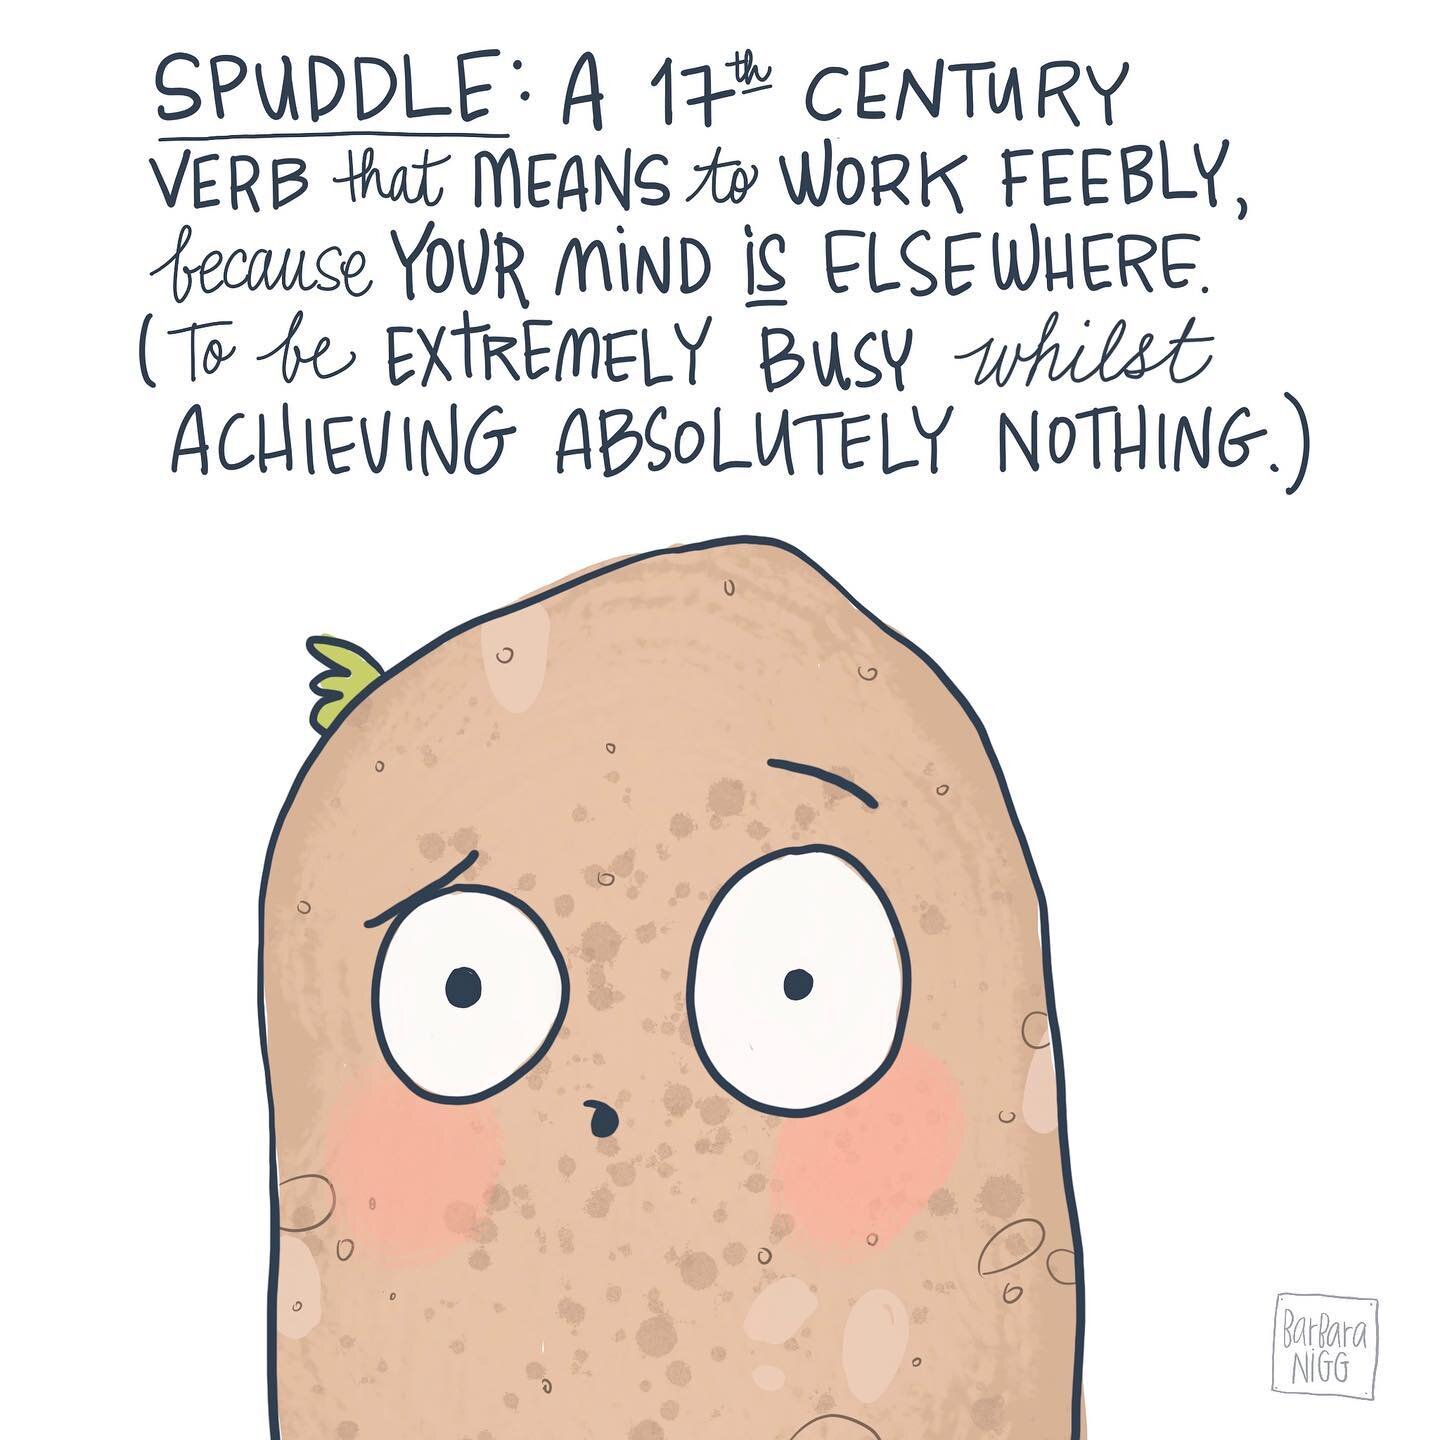 Some days all I do is spuddle.⁣
⁣
Are you a 𝘴𝘱𝘶𝘥𝘥𝘭𝘦𝘳 too? 🥔😂⁣
⁣
⁣
⁣
⁣
⁣
⁣
#100daysofdoodling #vegijokes #veganillustrations #100daysofsketchnotes #100dayproject #drawdaily #sketchaday #ipadsketching #drawdaily #potatopuns #100potatoes #dail